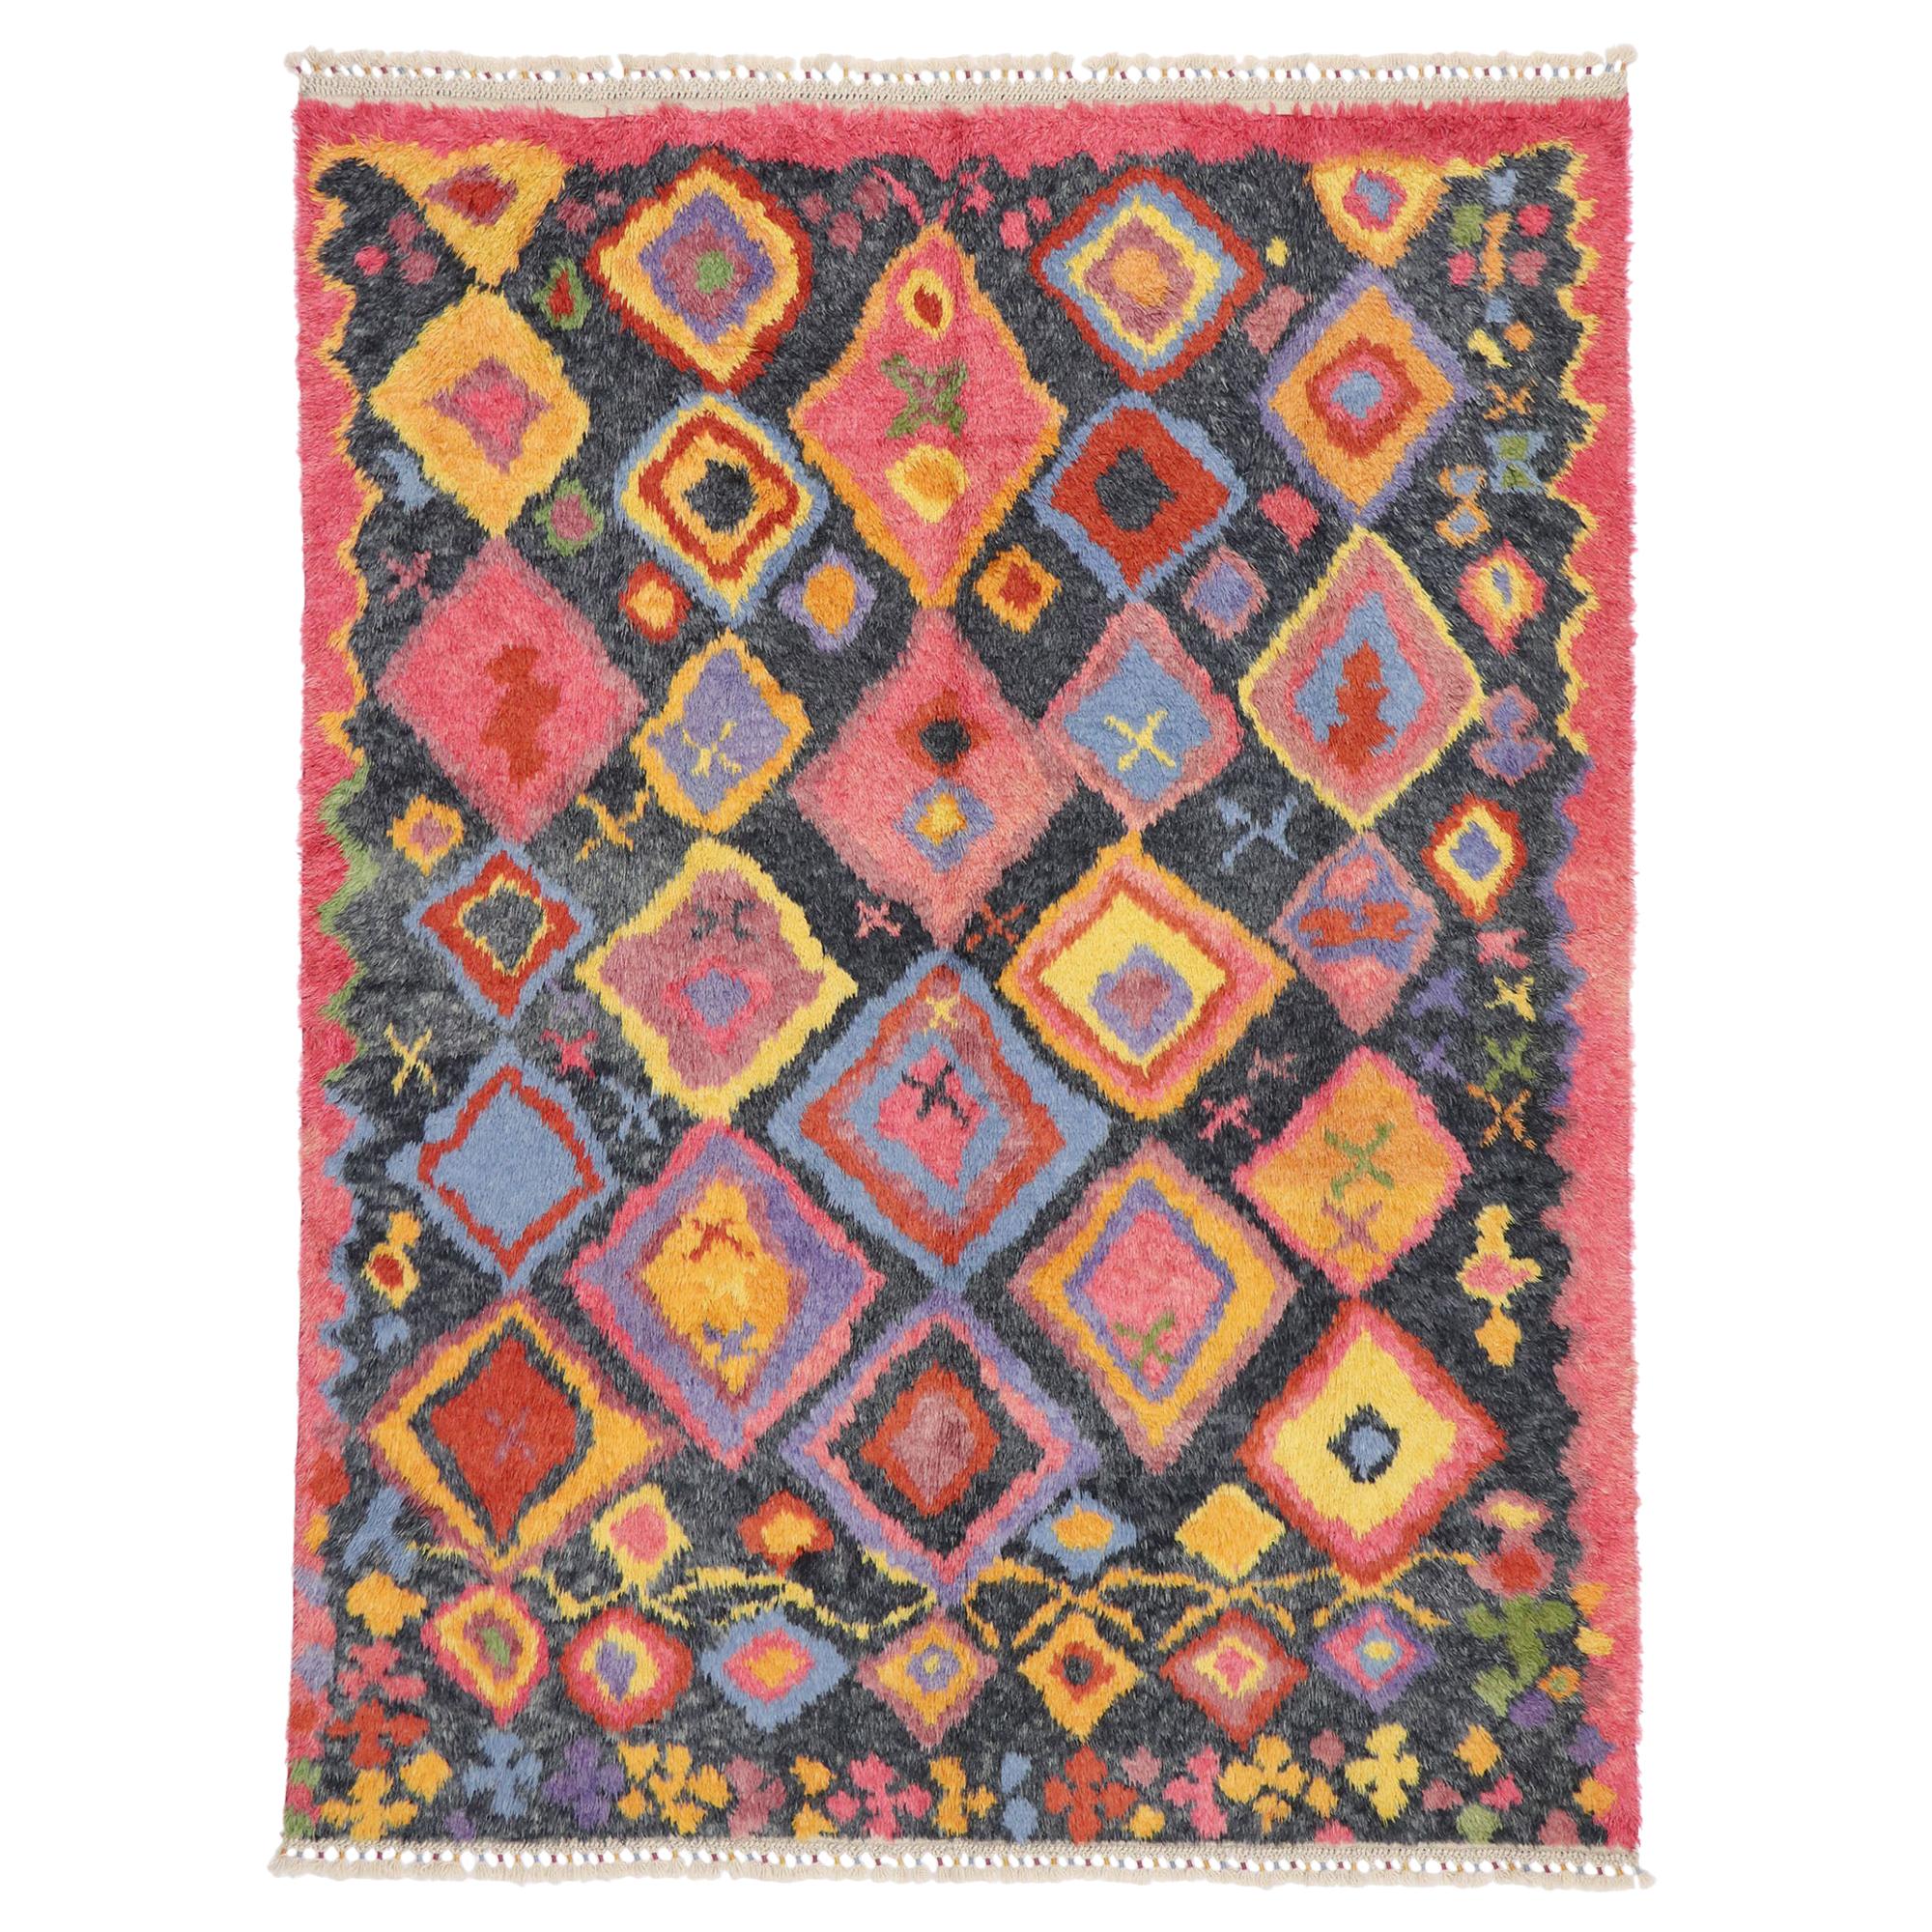 New Colorful Contemporary Tulu Shag Area Rug with Tribal Style For Sale